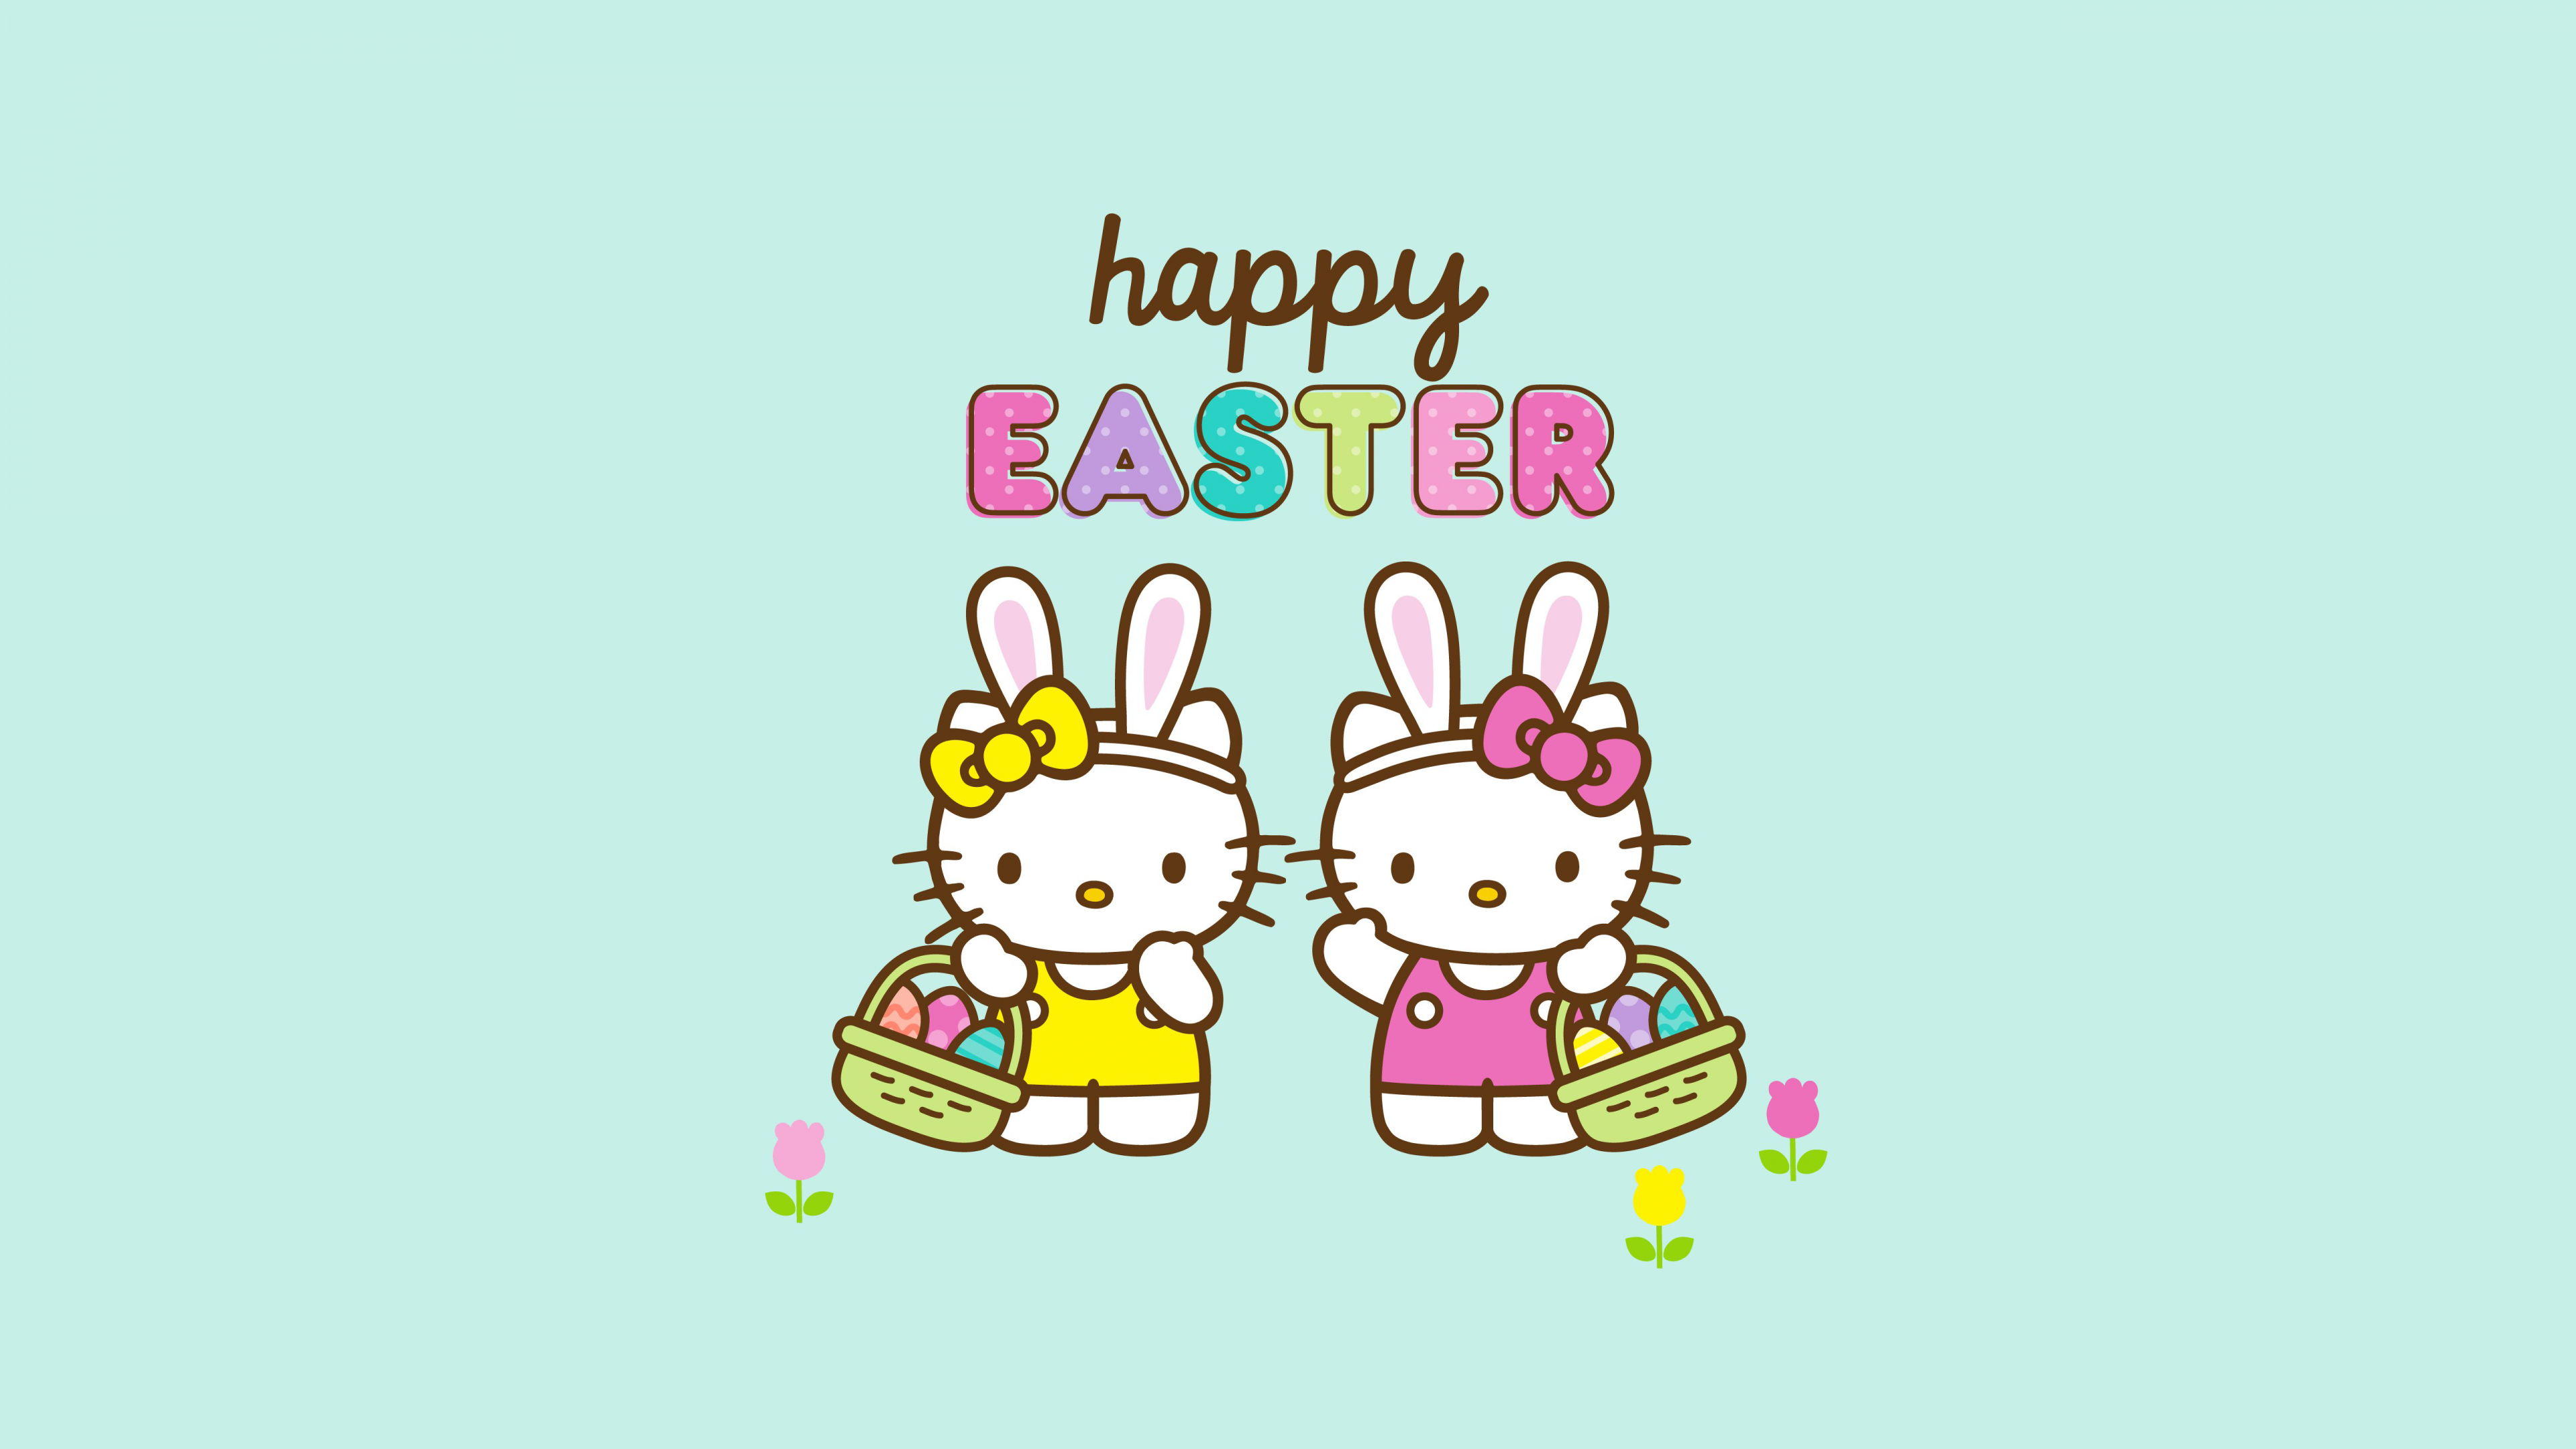 Easter Wallpaper Ideas  Top Happy Easter Wallpaper  World of Printables